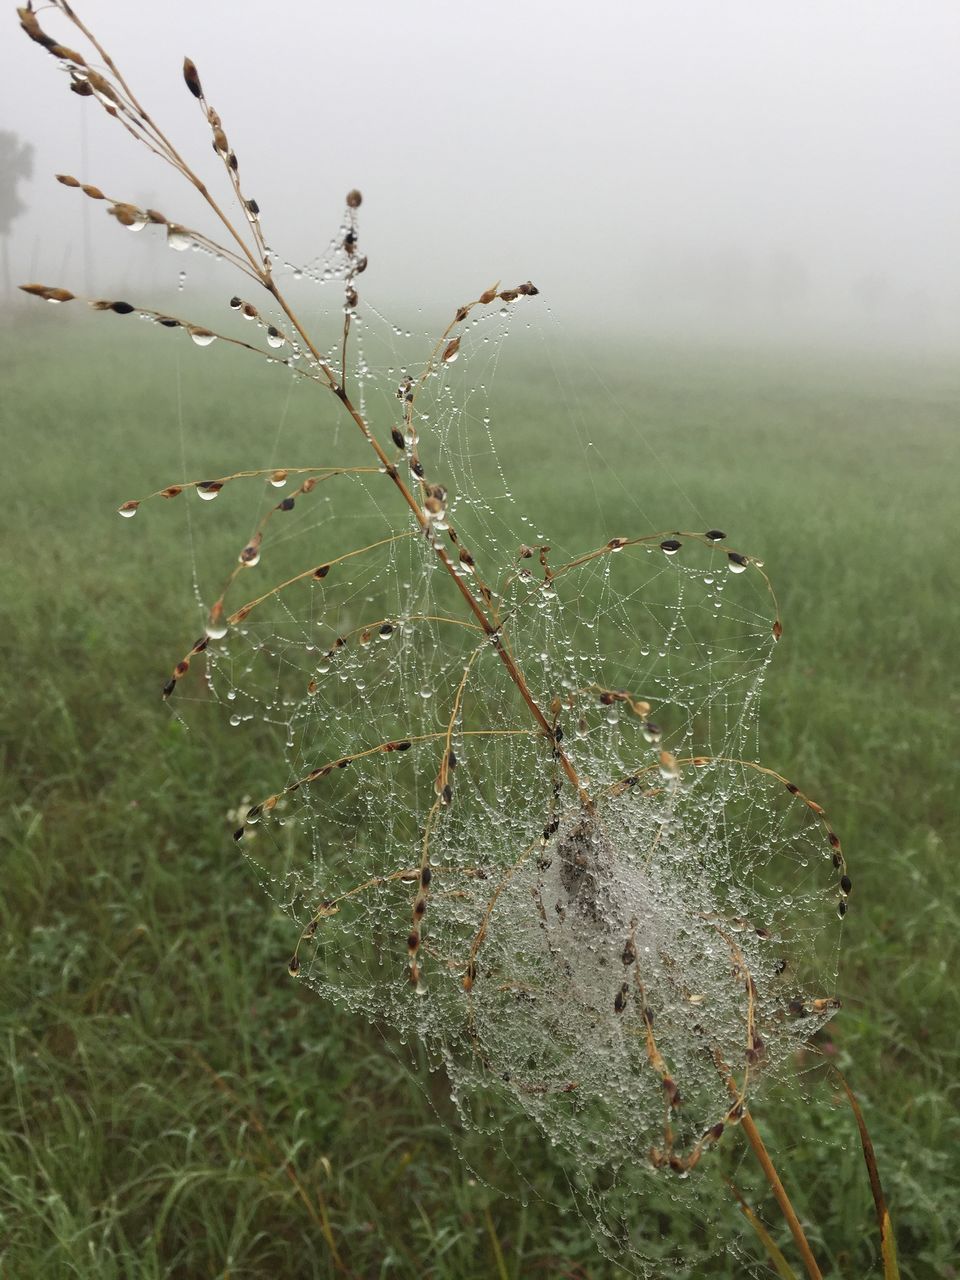 CLOSE-UP OF WET SPIDER WEB ON PLANTS